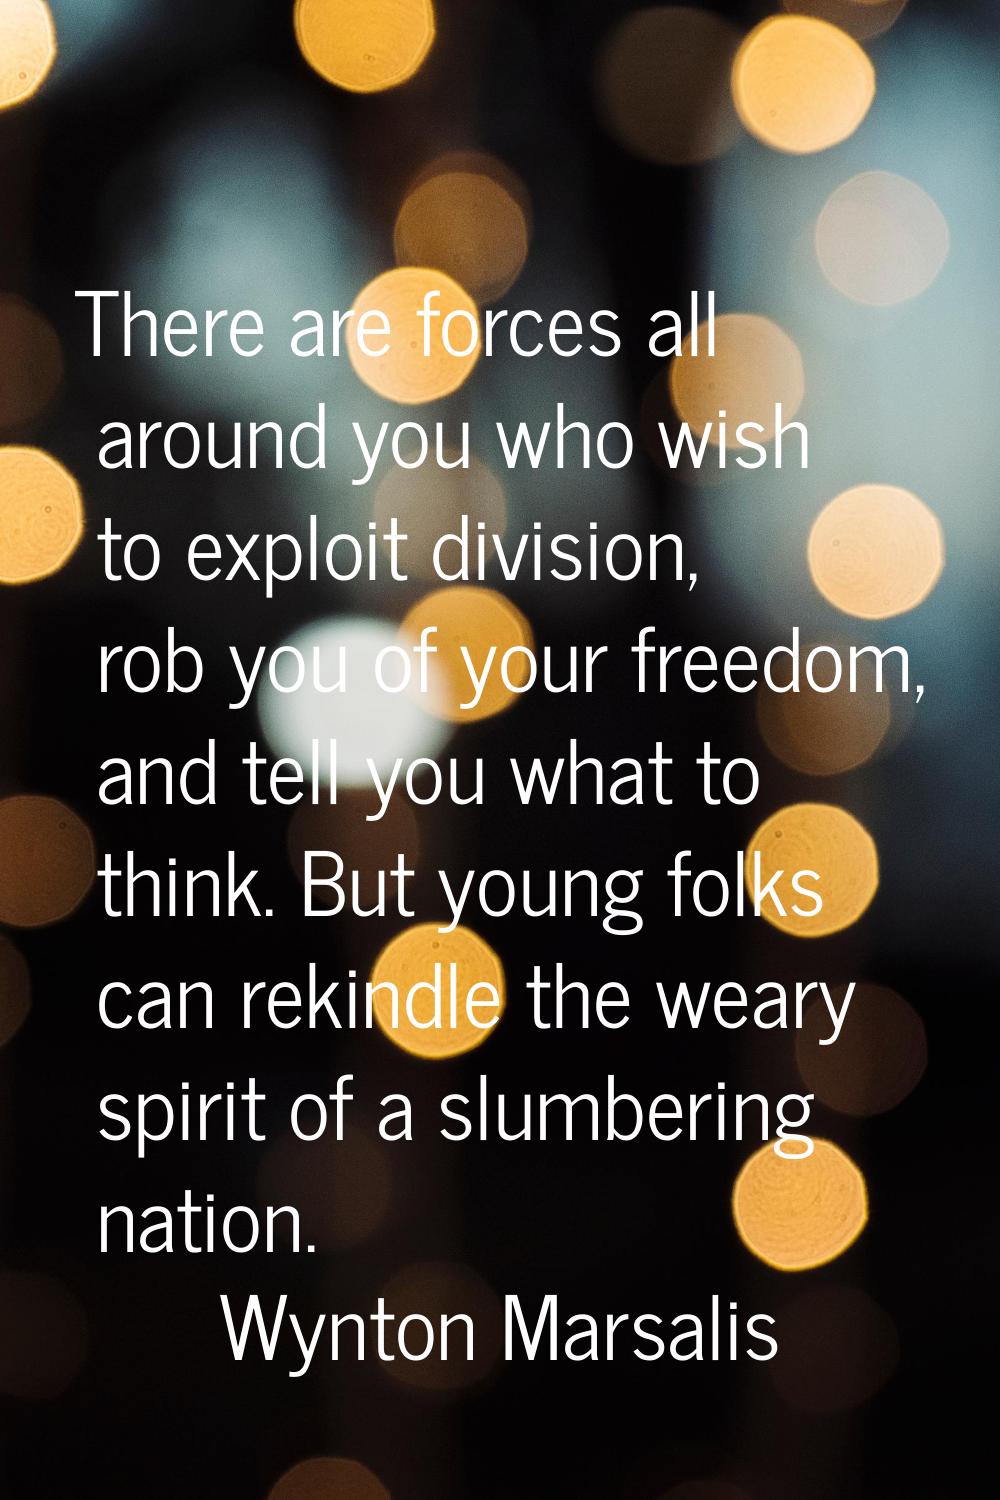 There are forces all around you who wish to exploit division, rob you of your freedom, and tell you